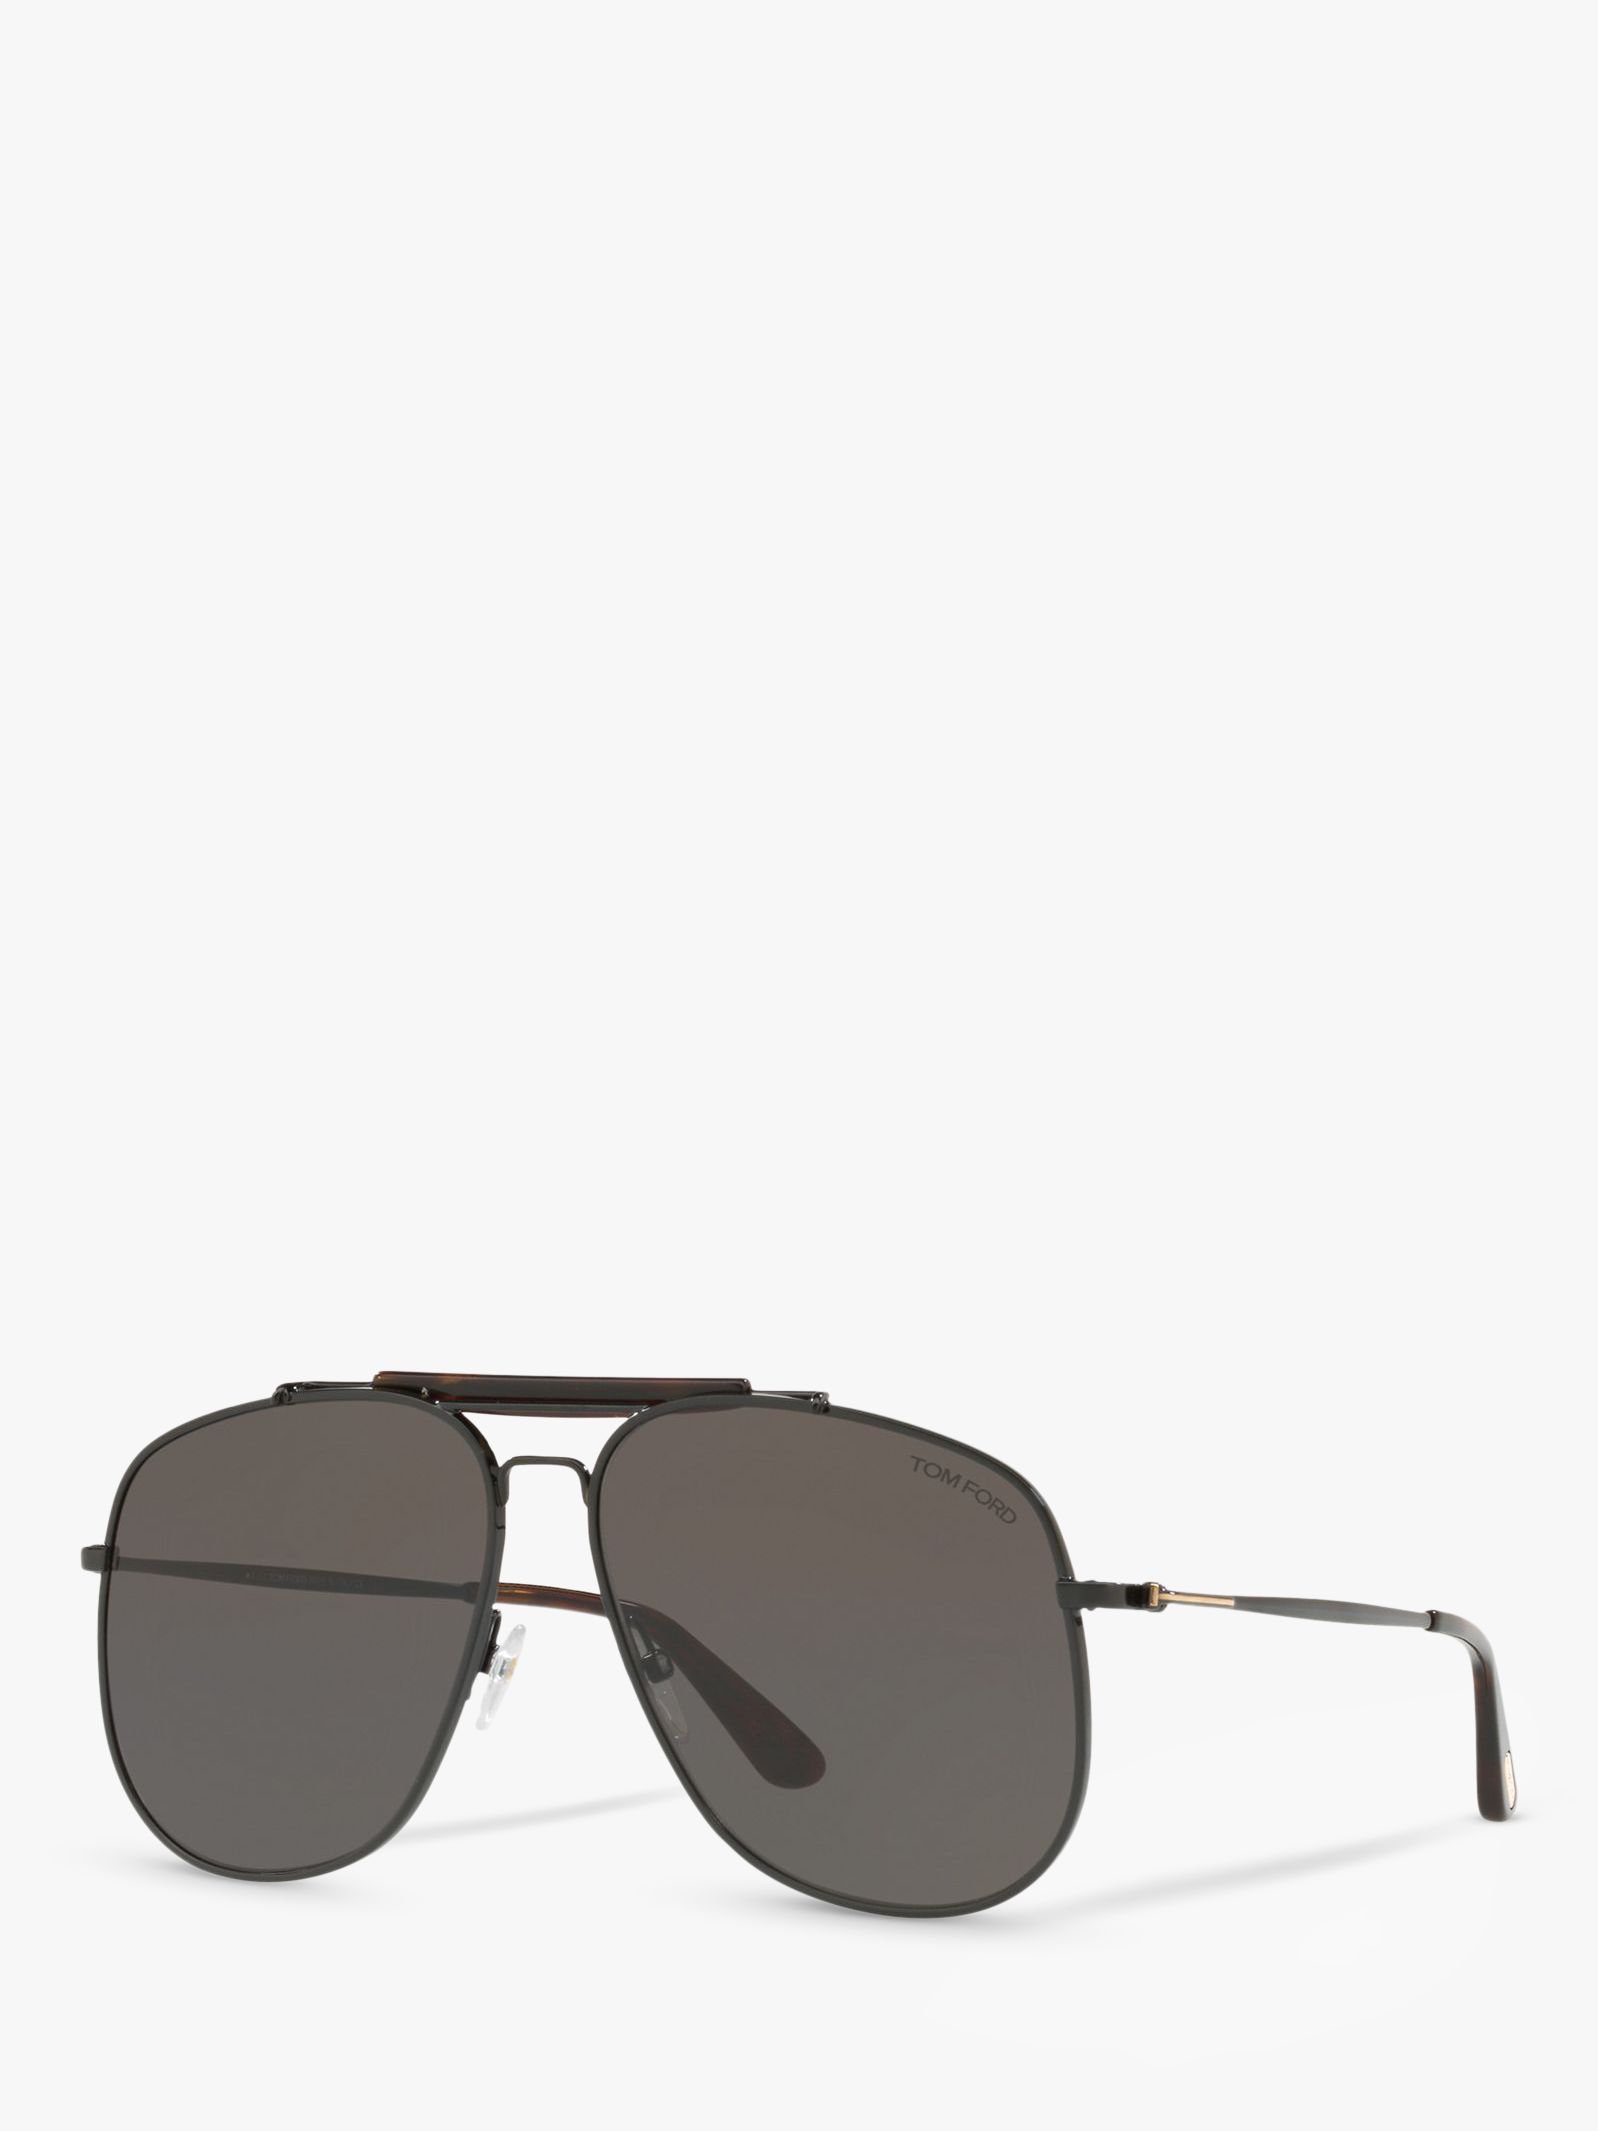 Tom Ford Ft0557 Connor Aviator Sunglasses Black Grey At John Lewis And Partners